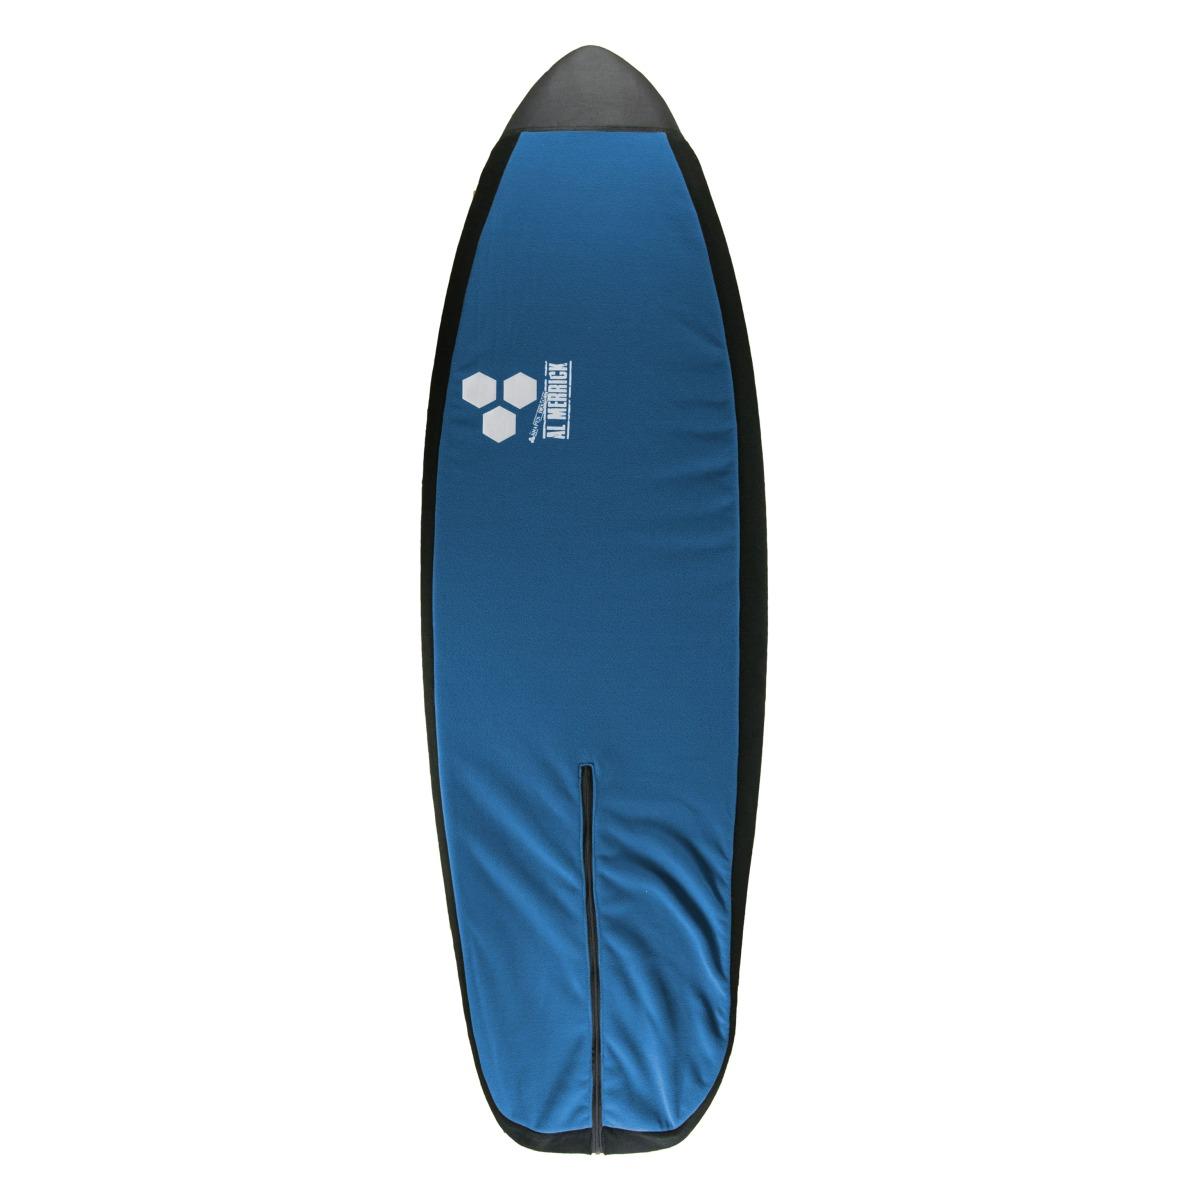 Calzino Surf Snuggle Erp Specialty 7.6 CHANNEL ISLANDS